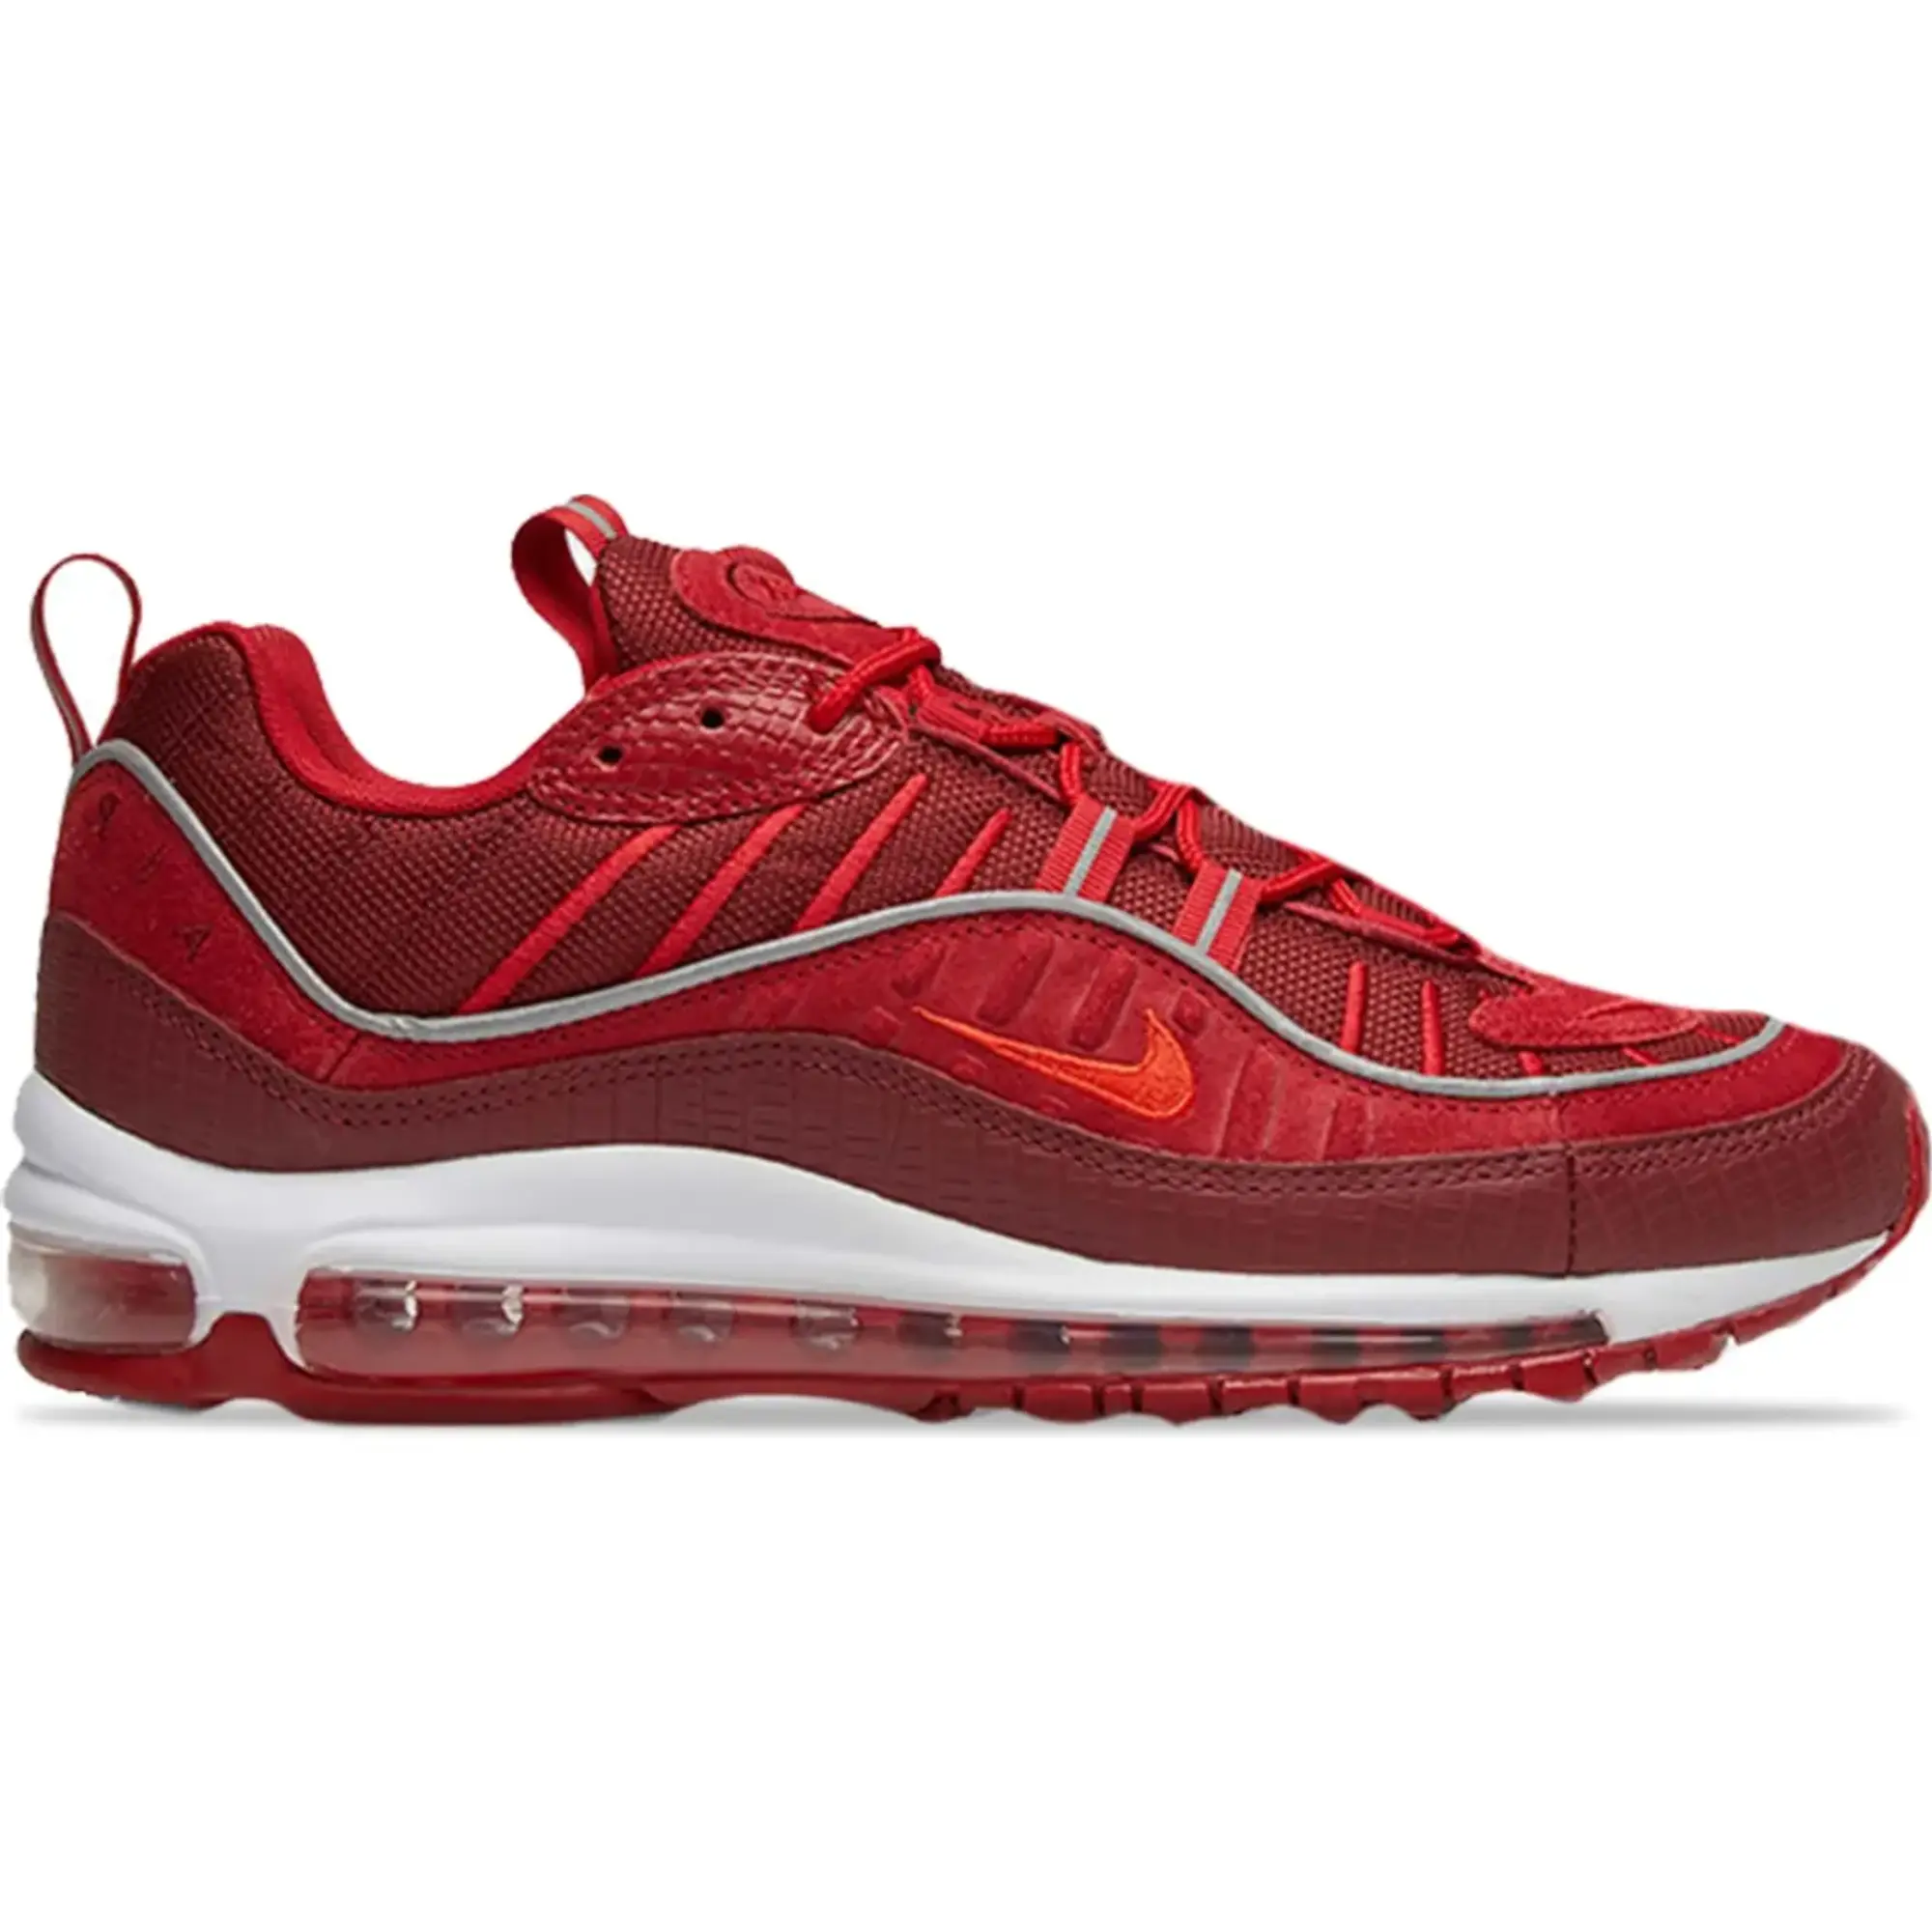 Nike Air Max 98 SE Team Red Shoes